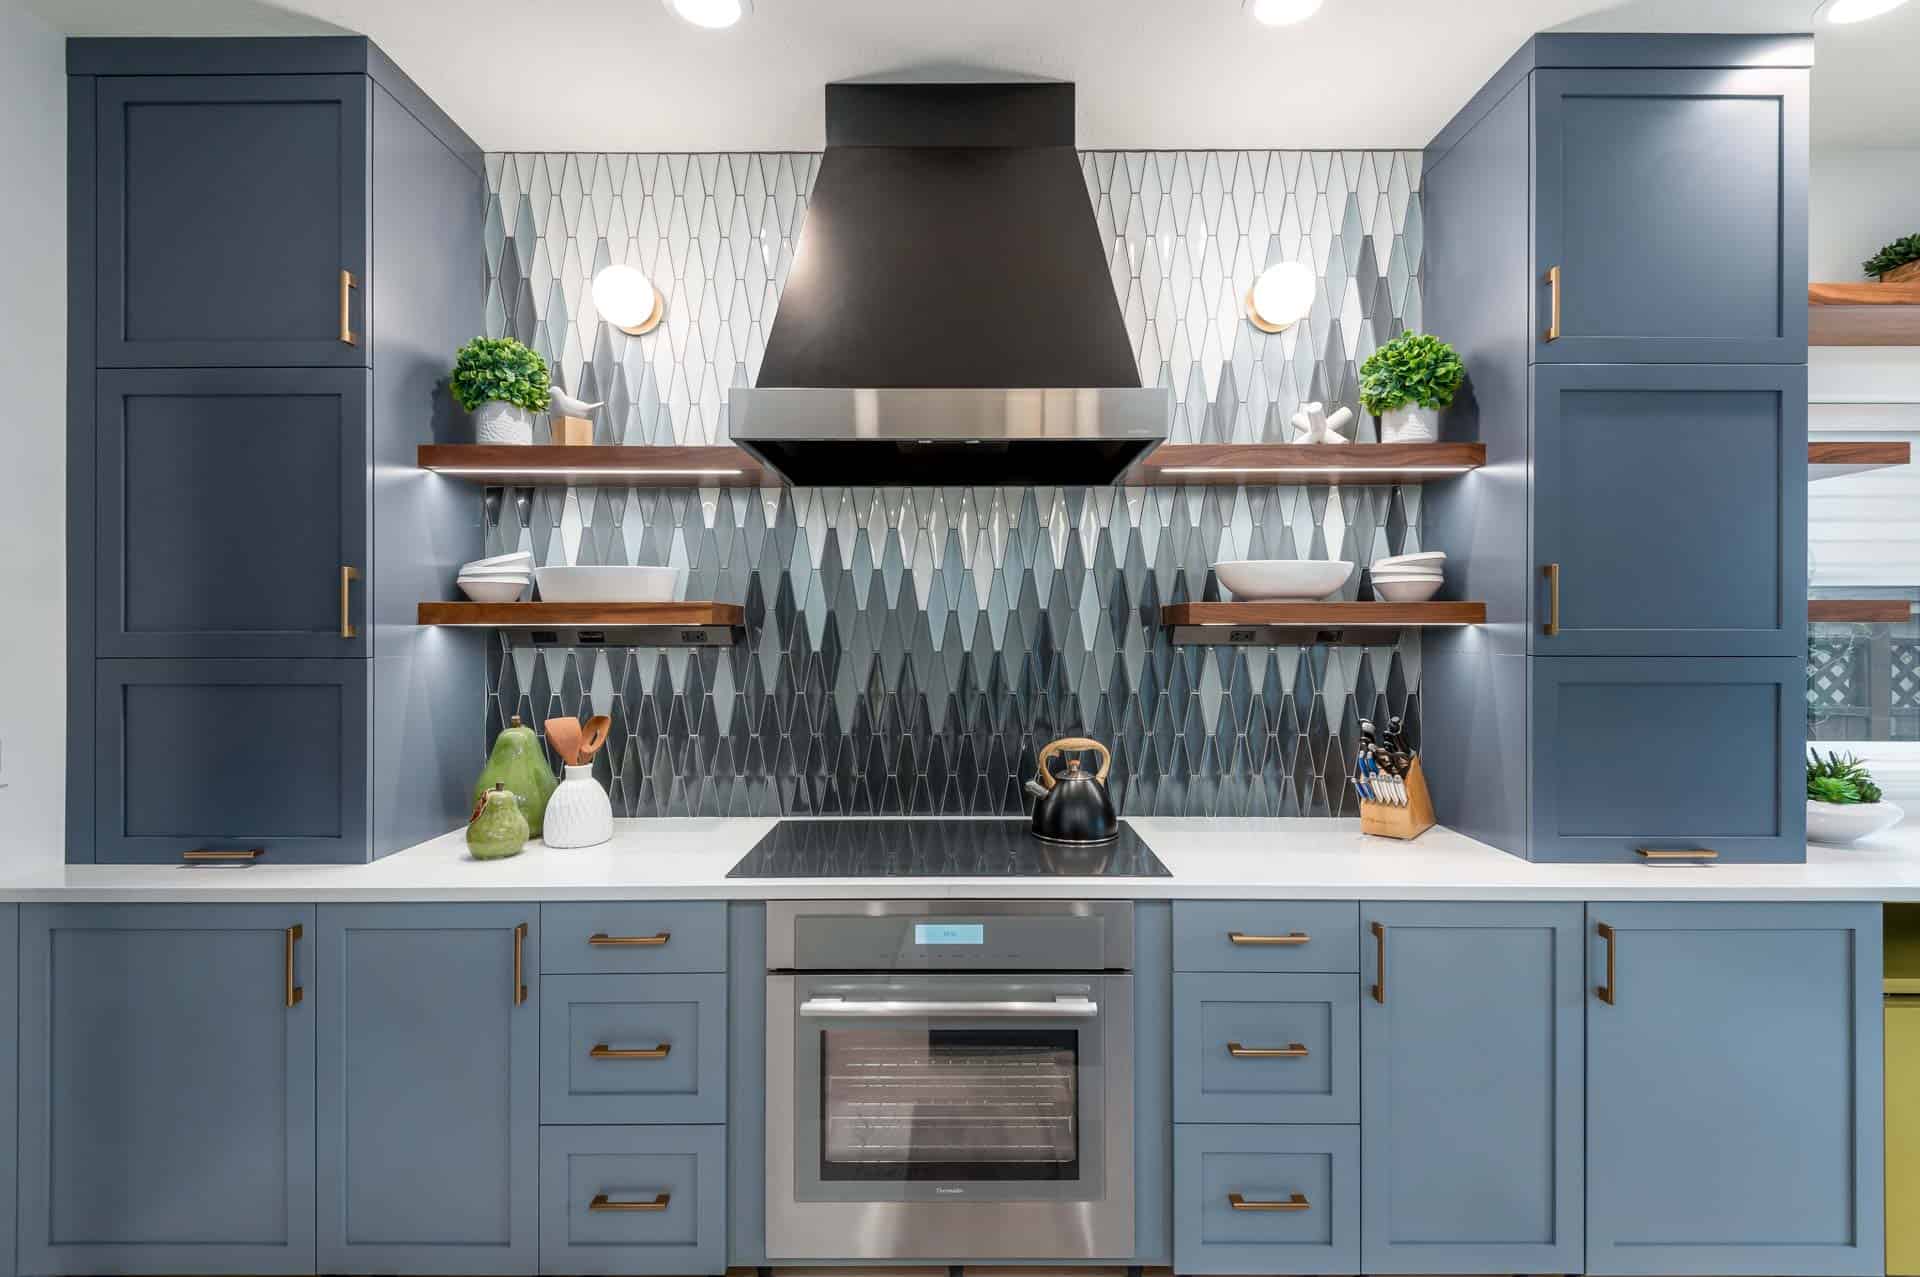 How to Pick the Perfect Teal Backsplash for Your Kitchen: 7 Gorgeous Design Ideas You